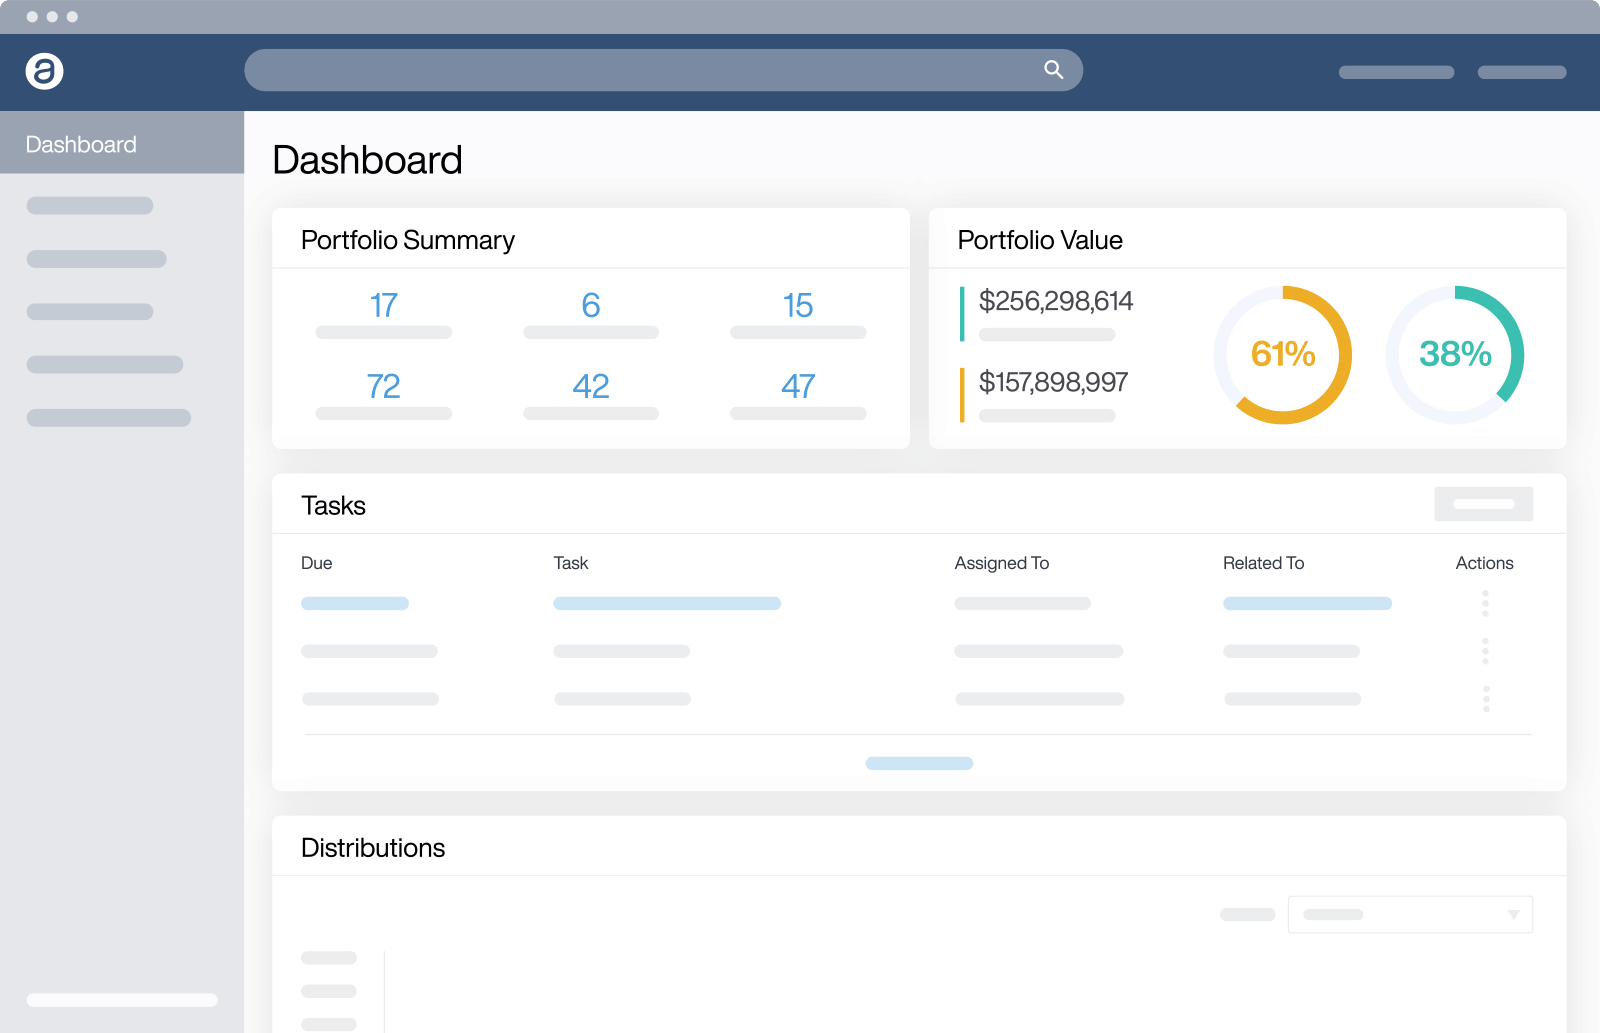 AppFolio Investment Management interface window of the main Dashboard.